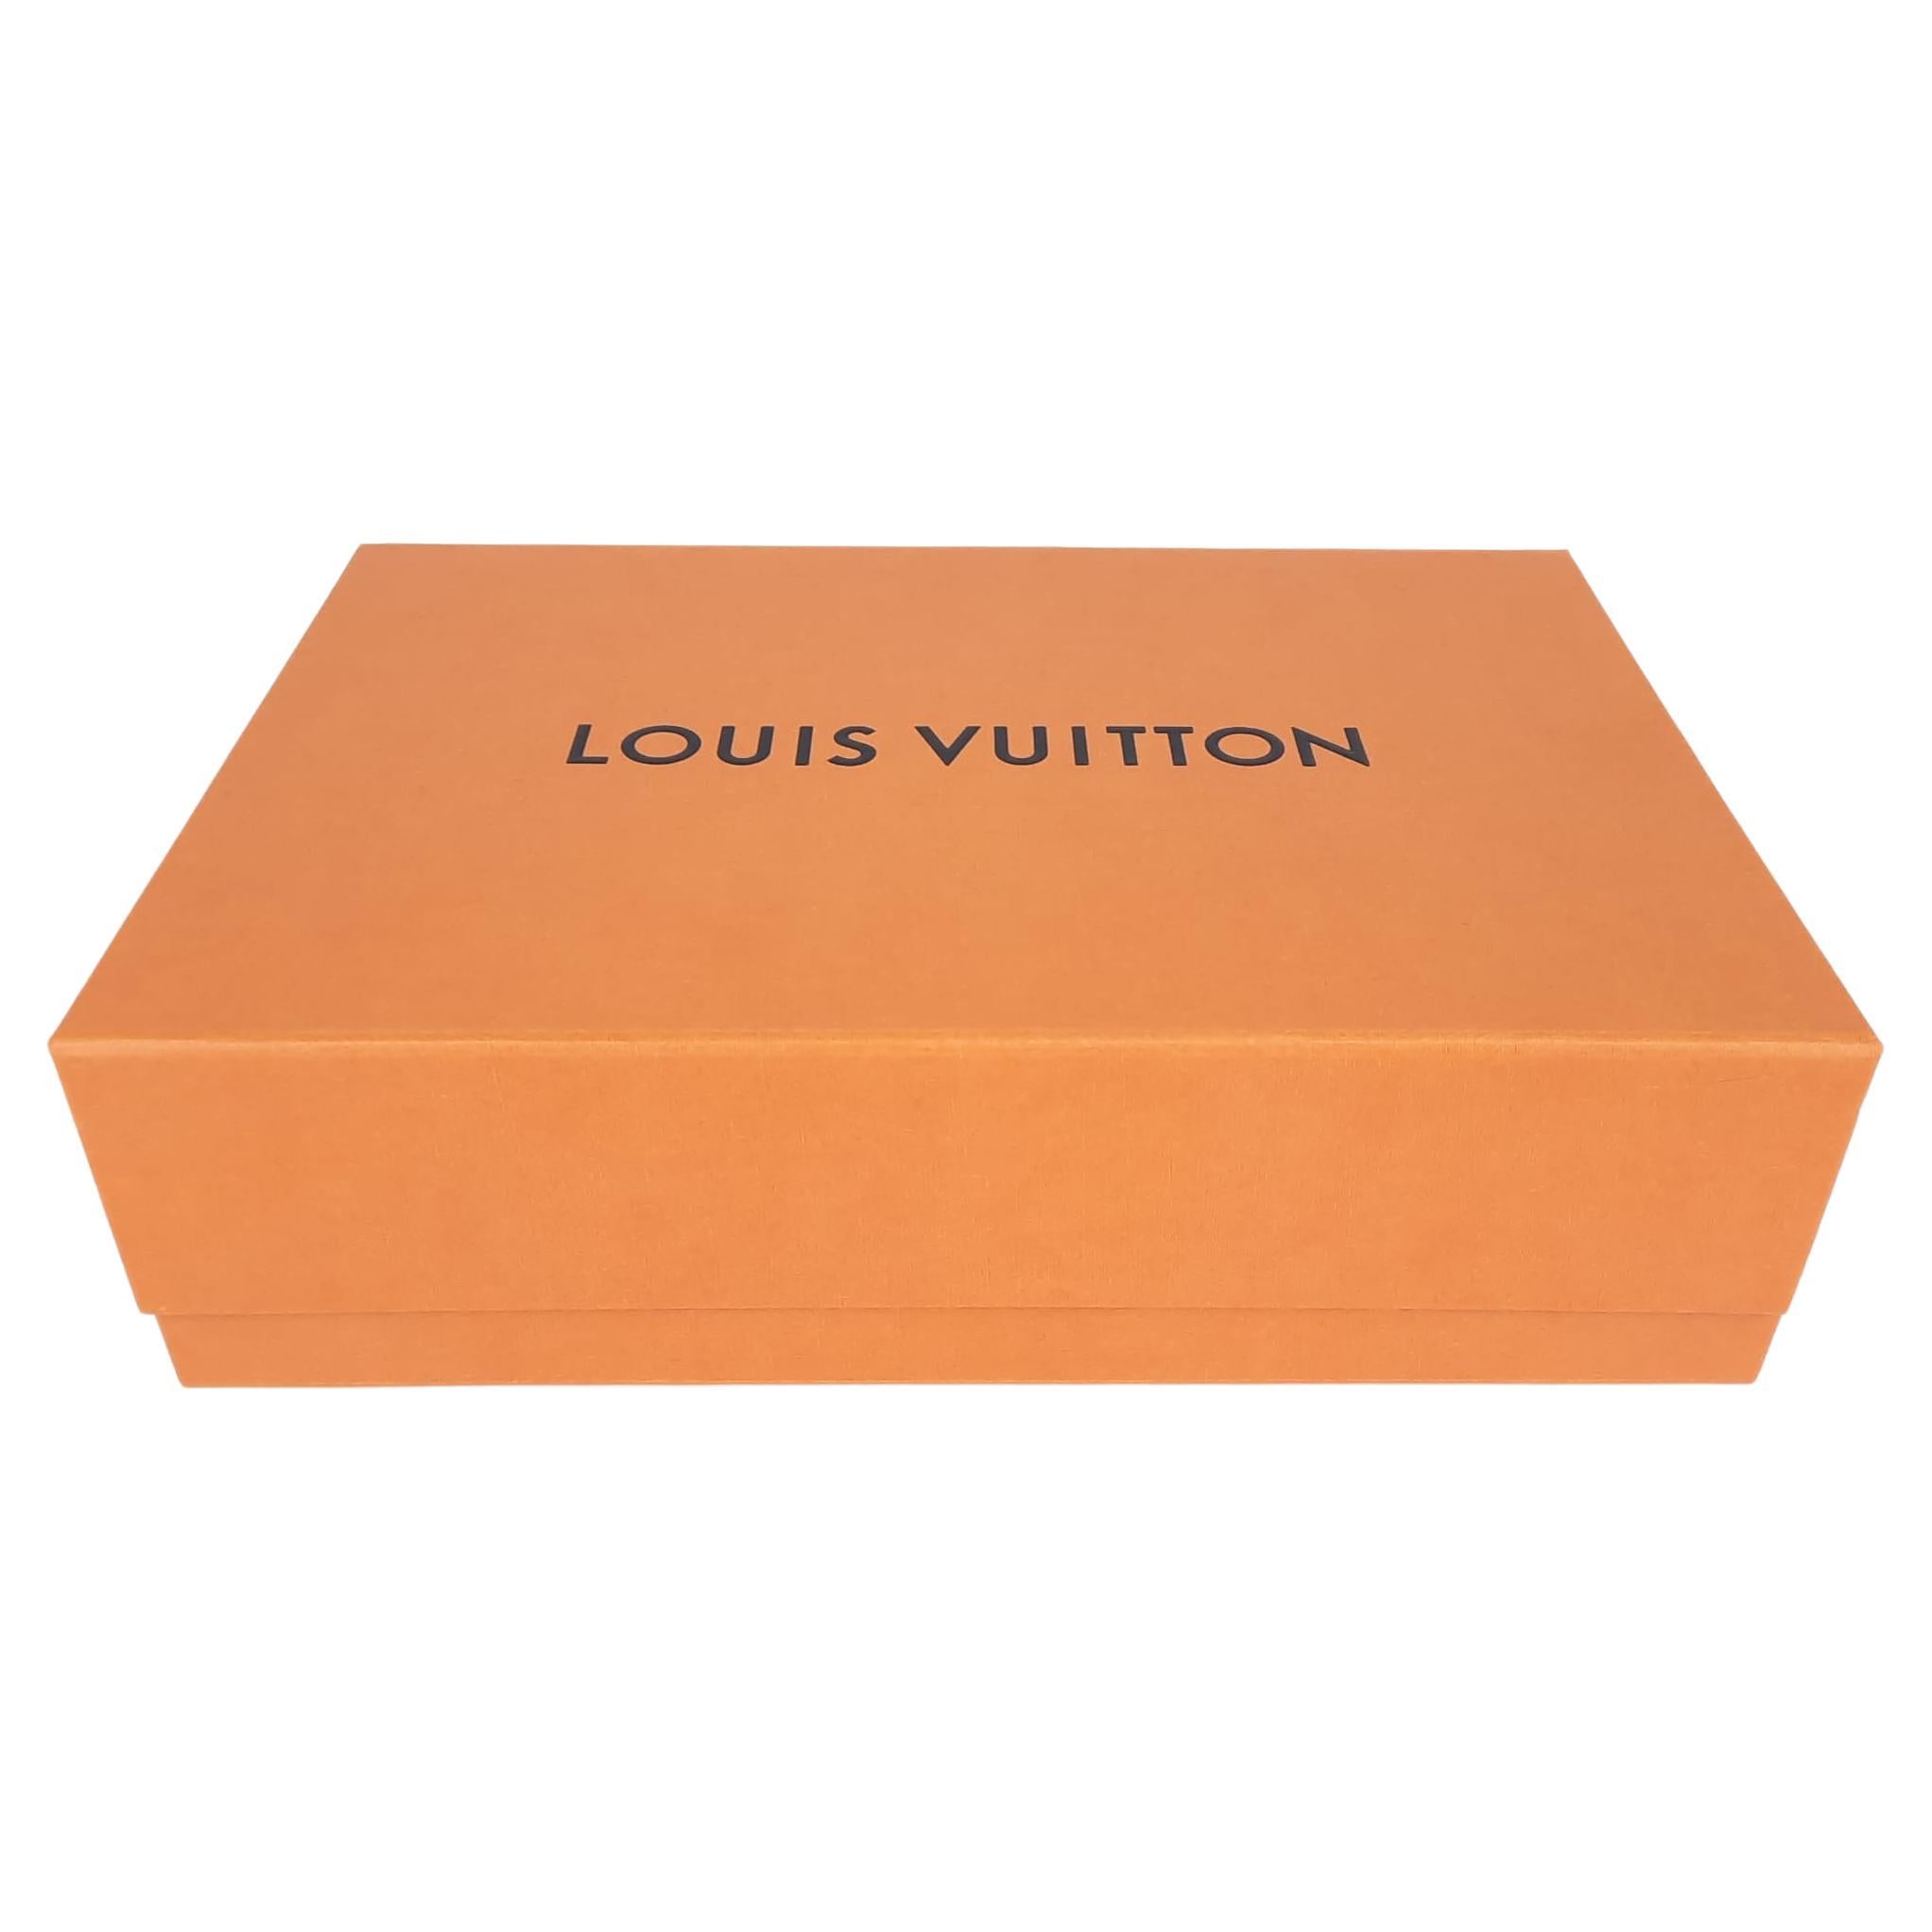 Louis Vuitton Antartica - 2 For Sale on 1stDibs